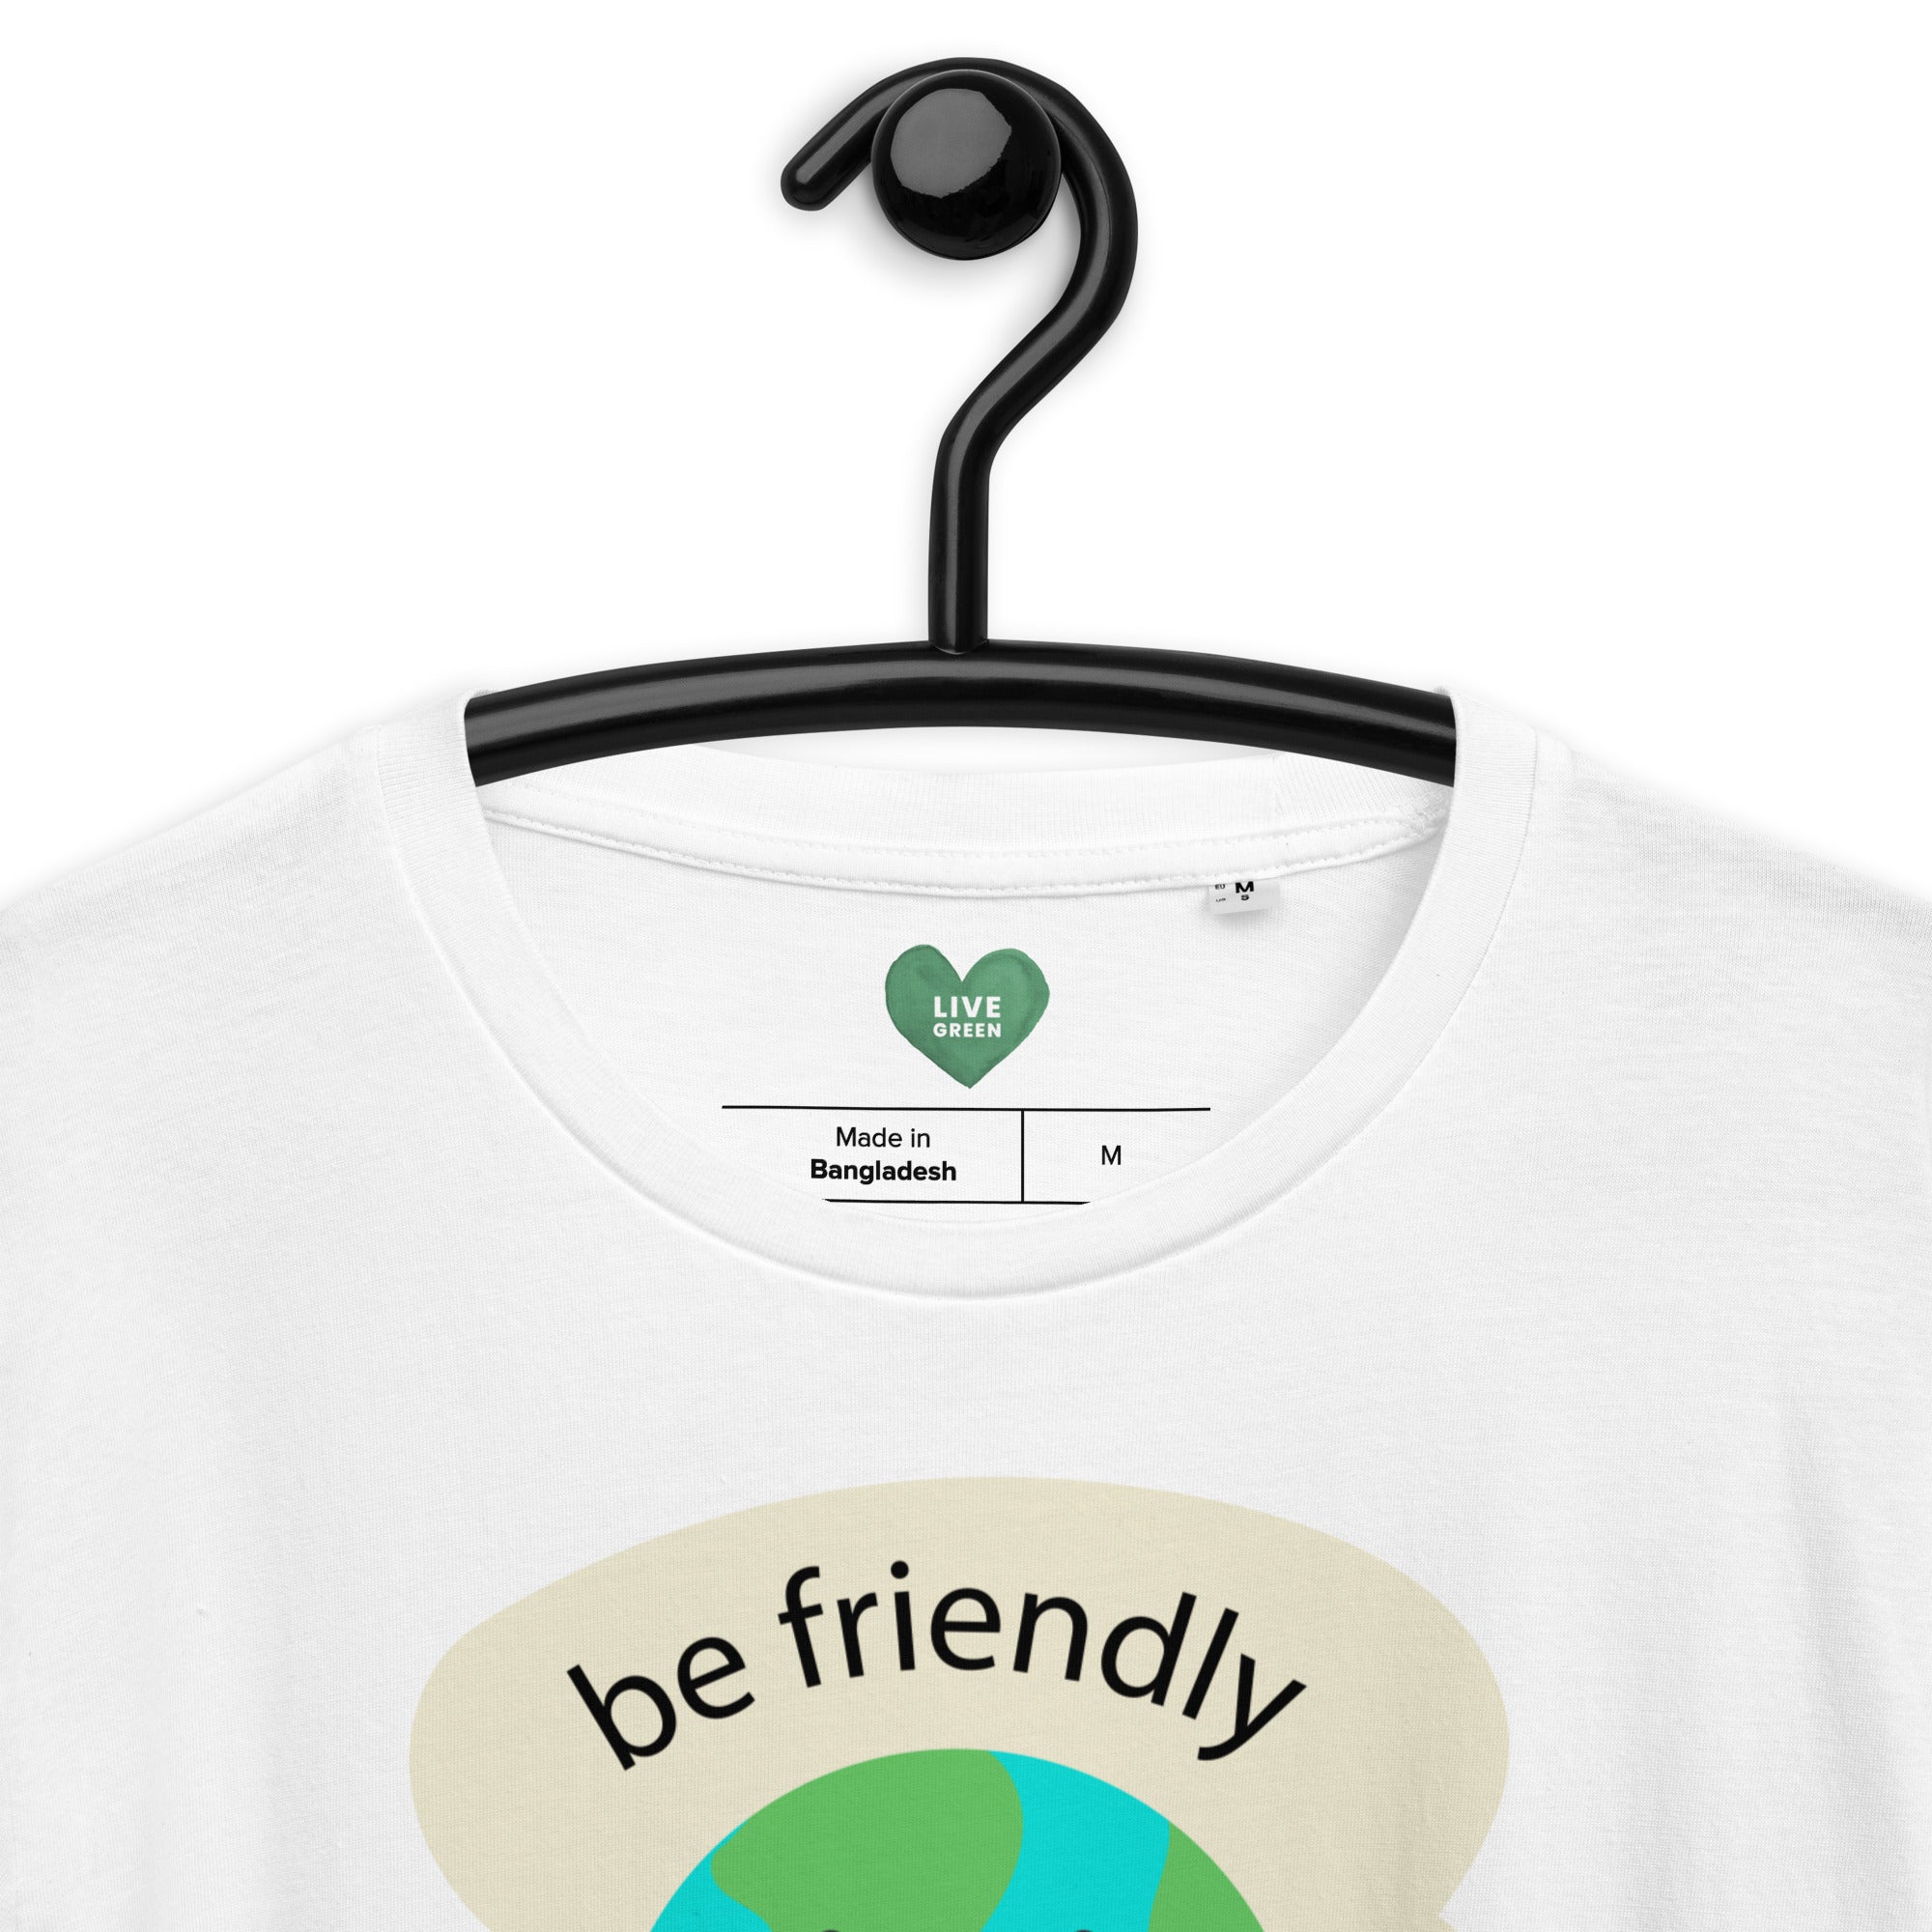 Be Friendly With Me Unisex Organic Cotton T-Shirt